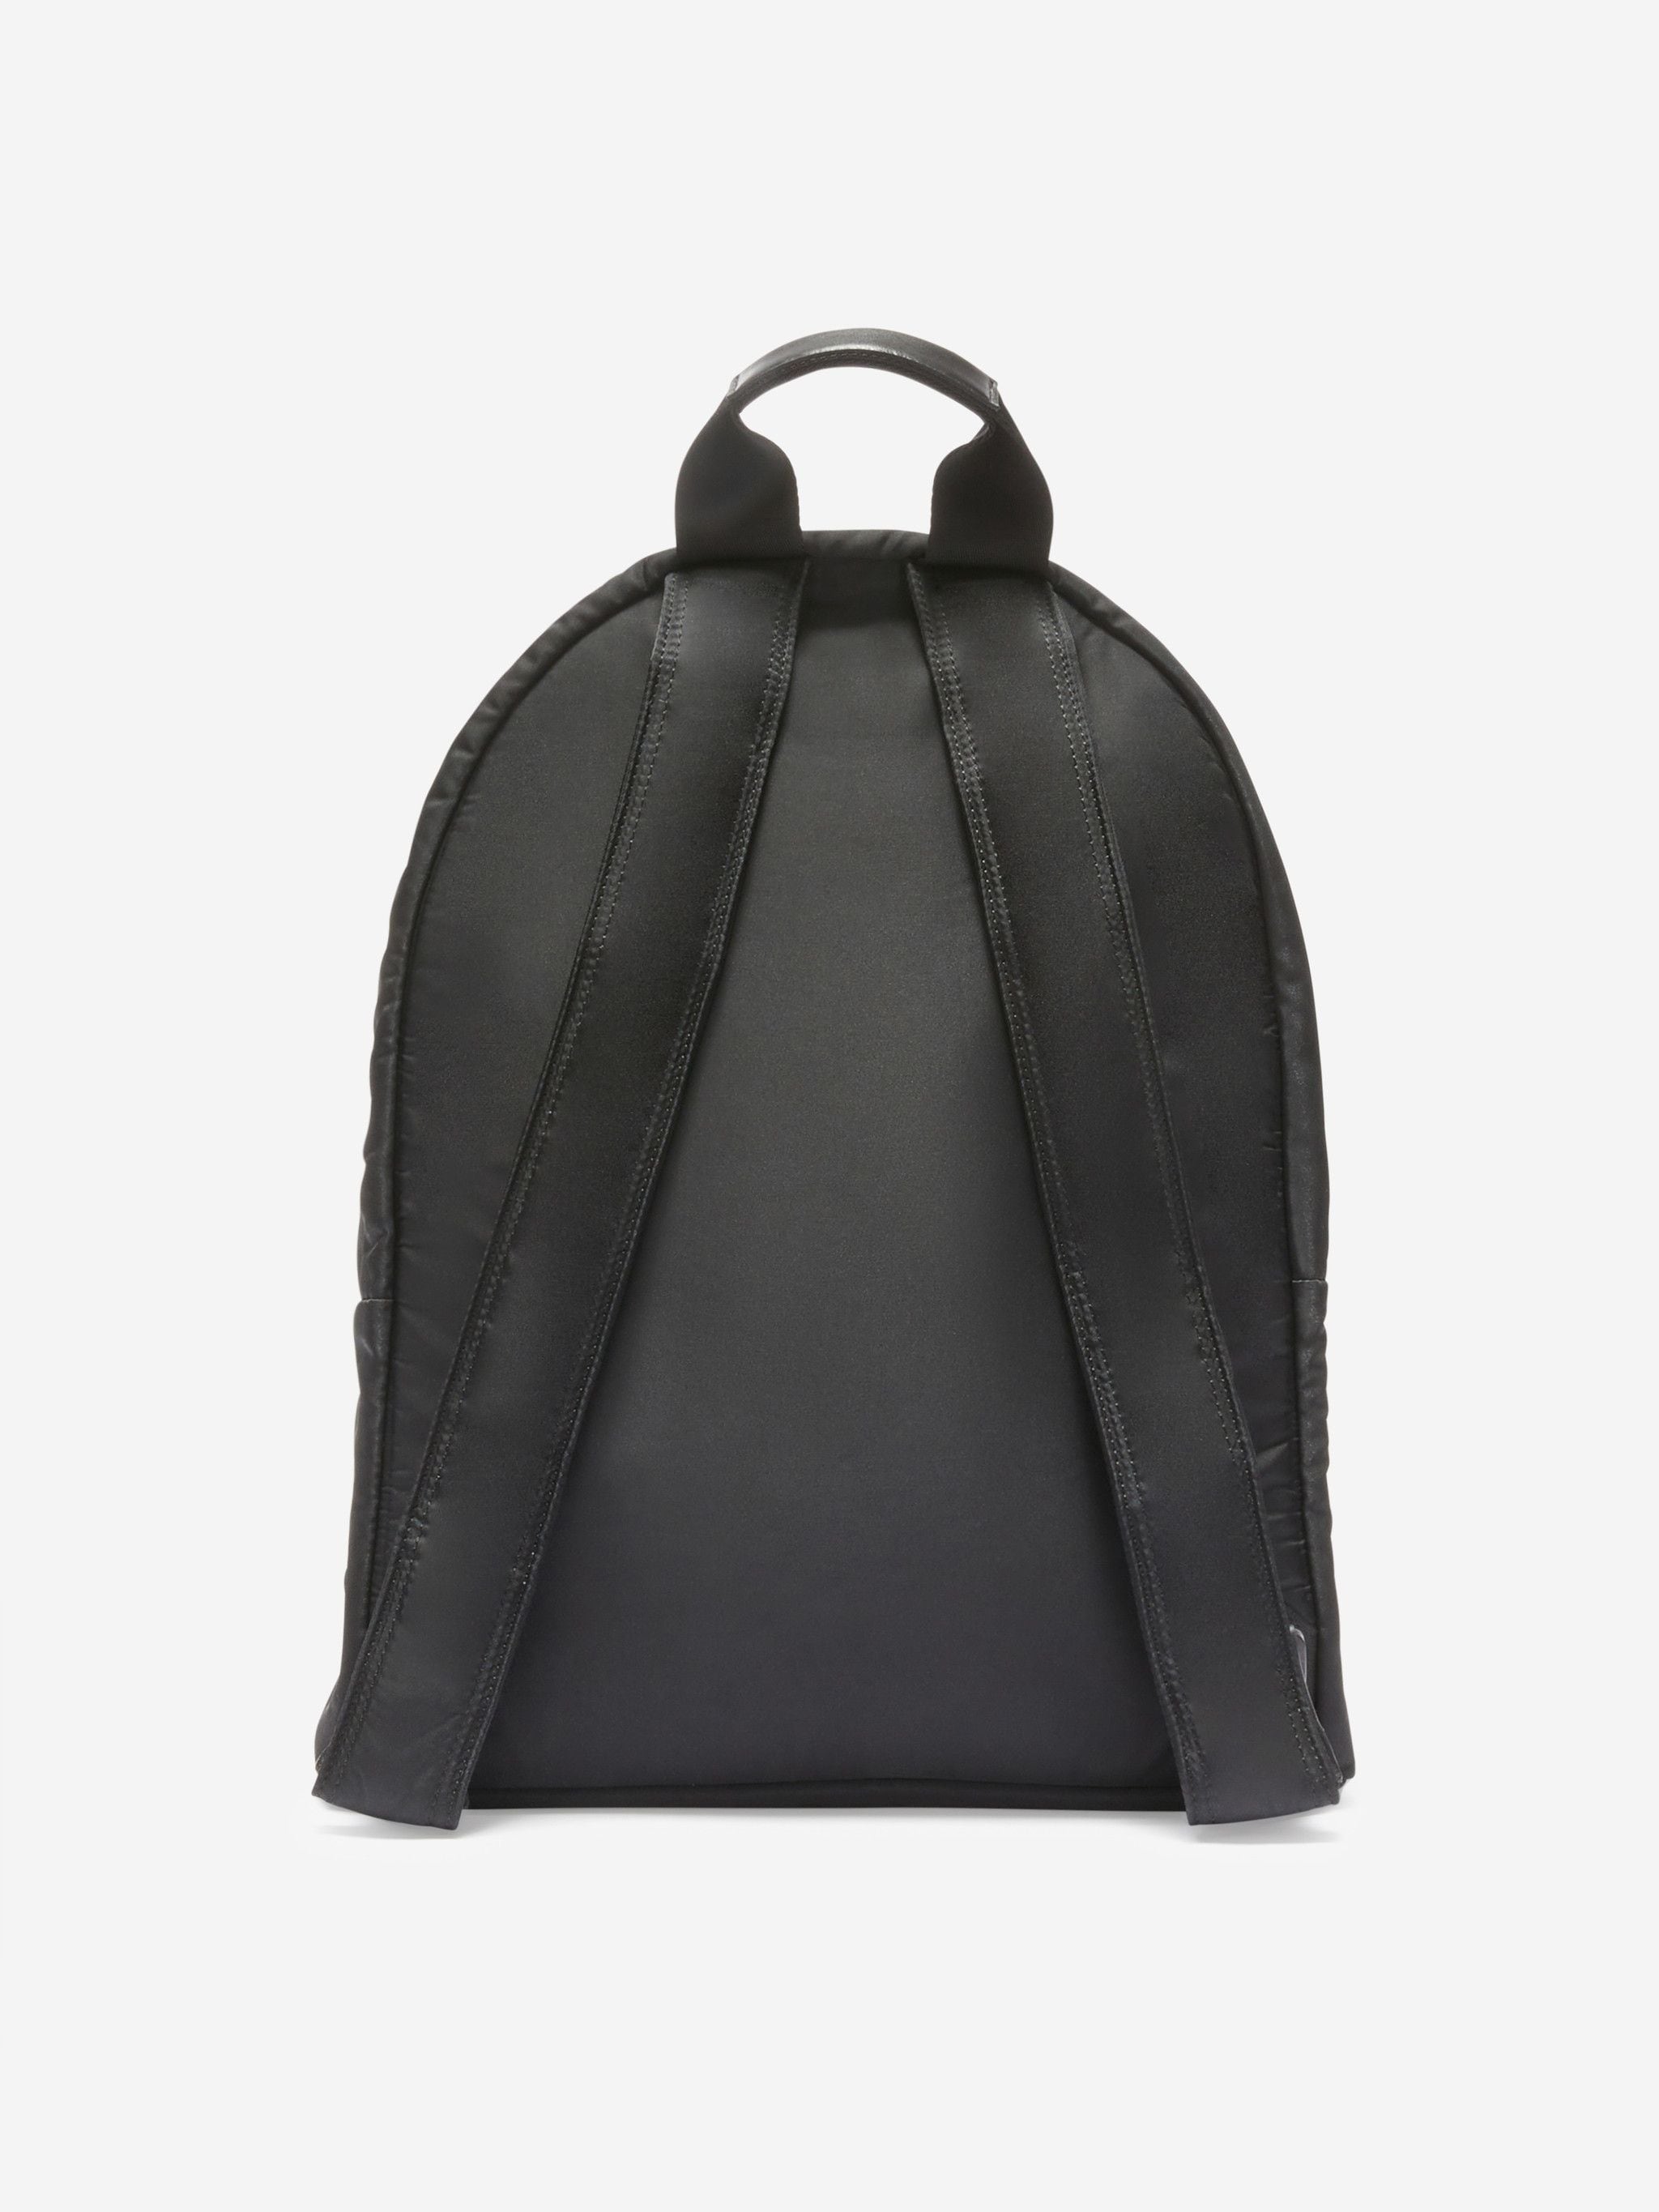 Wings-print backpack from Marcelo Burlon County of Milan featuring black, cotton, signature Marcelo Burlon Wings print, single rounded top handle, all-around zip fastening, two adjustable shoulder straps and main compartment.